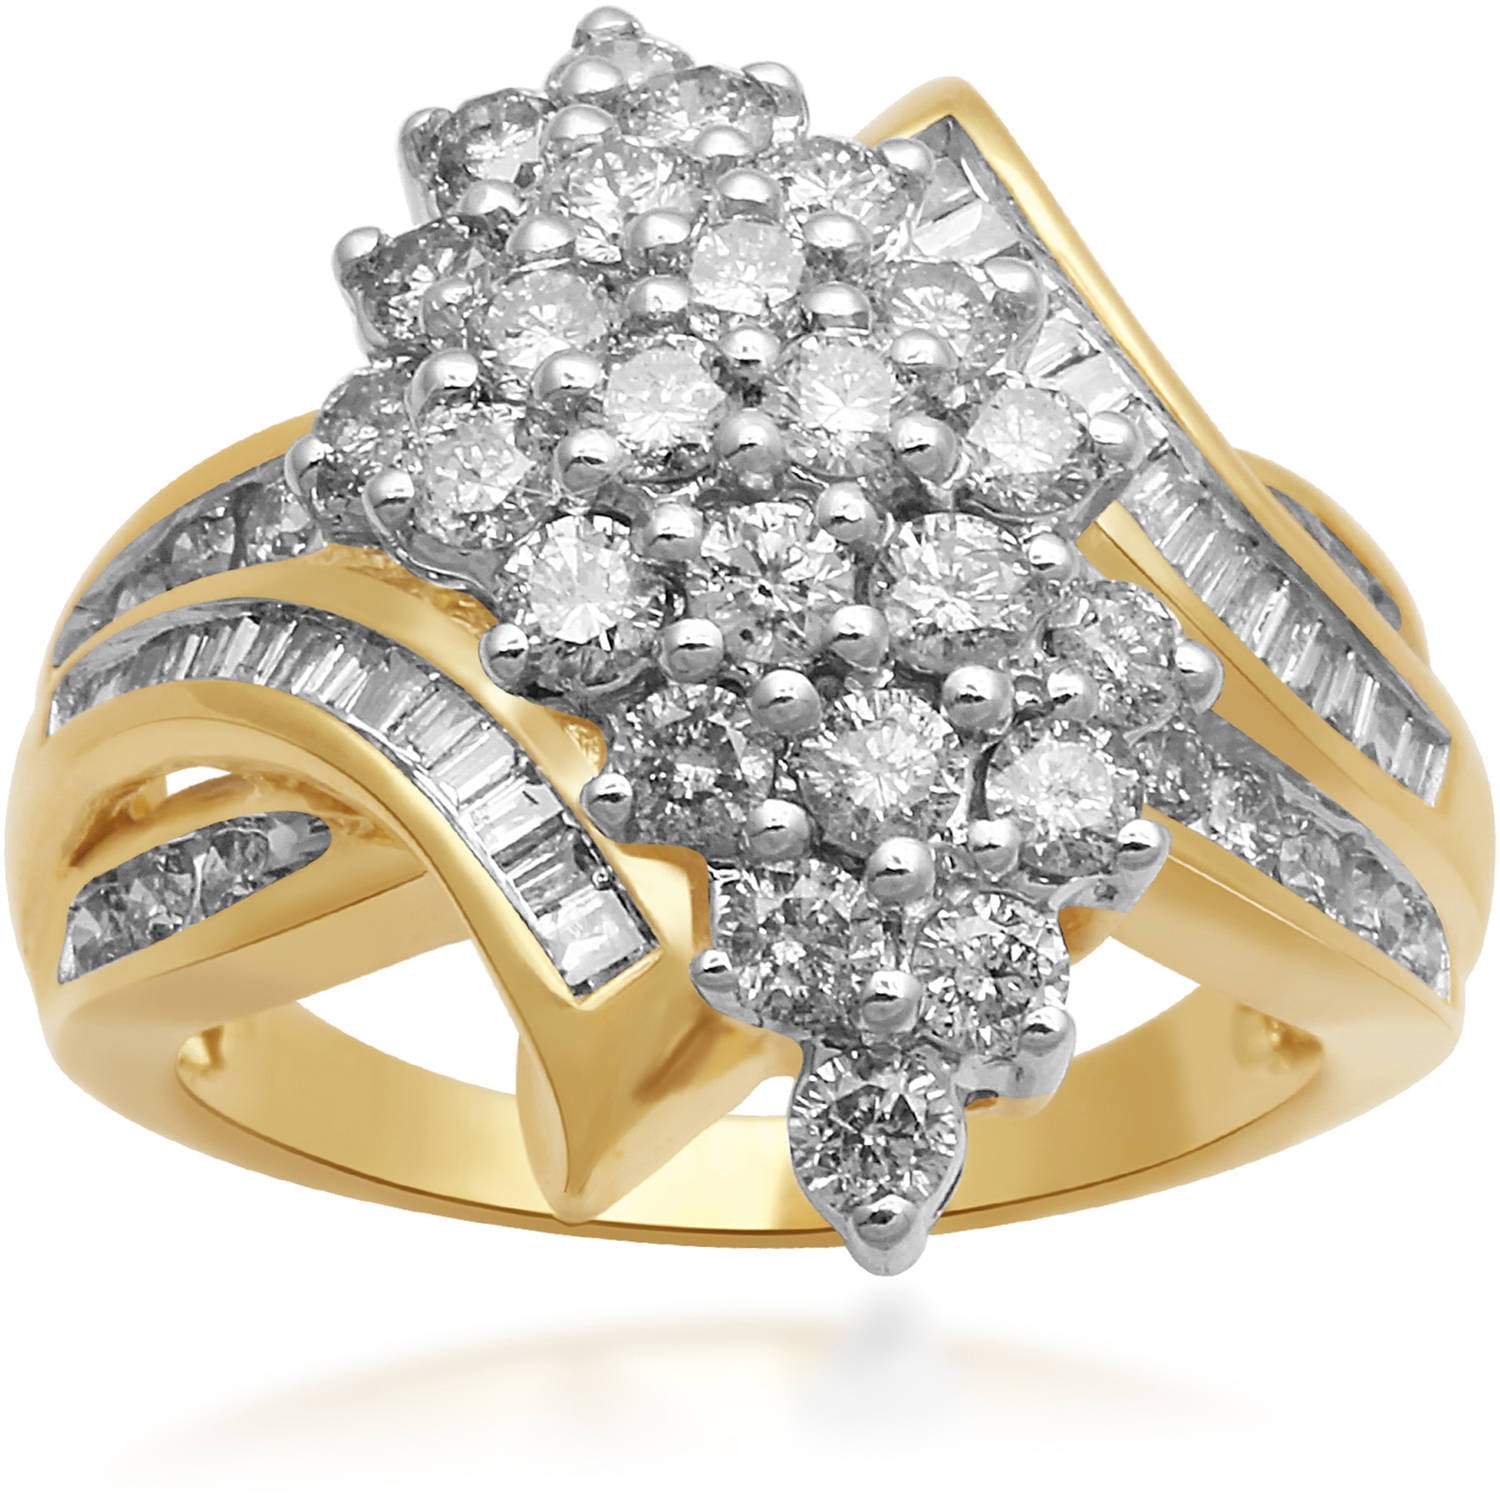 ONLINE - 2 Carat T.W. Diamond 10kt Yellow Gold Fashion Cluster Ring ...